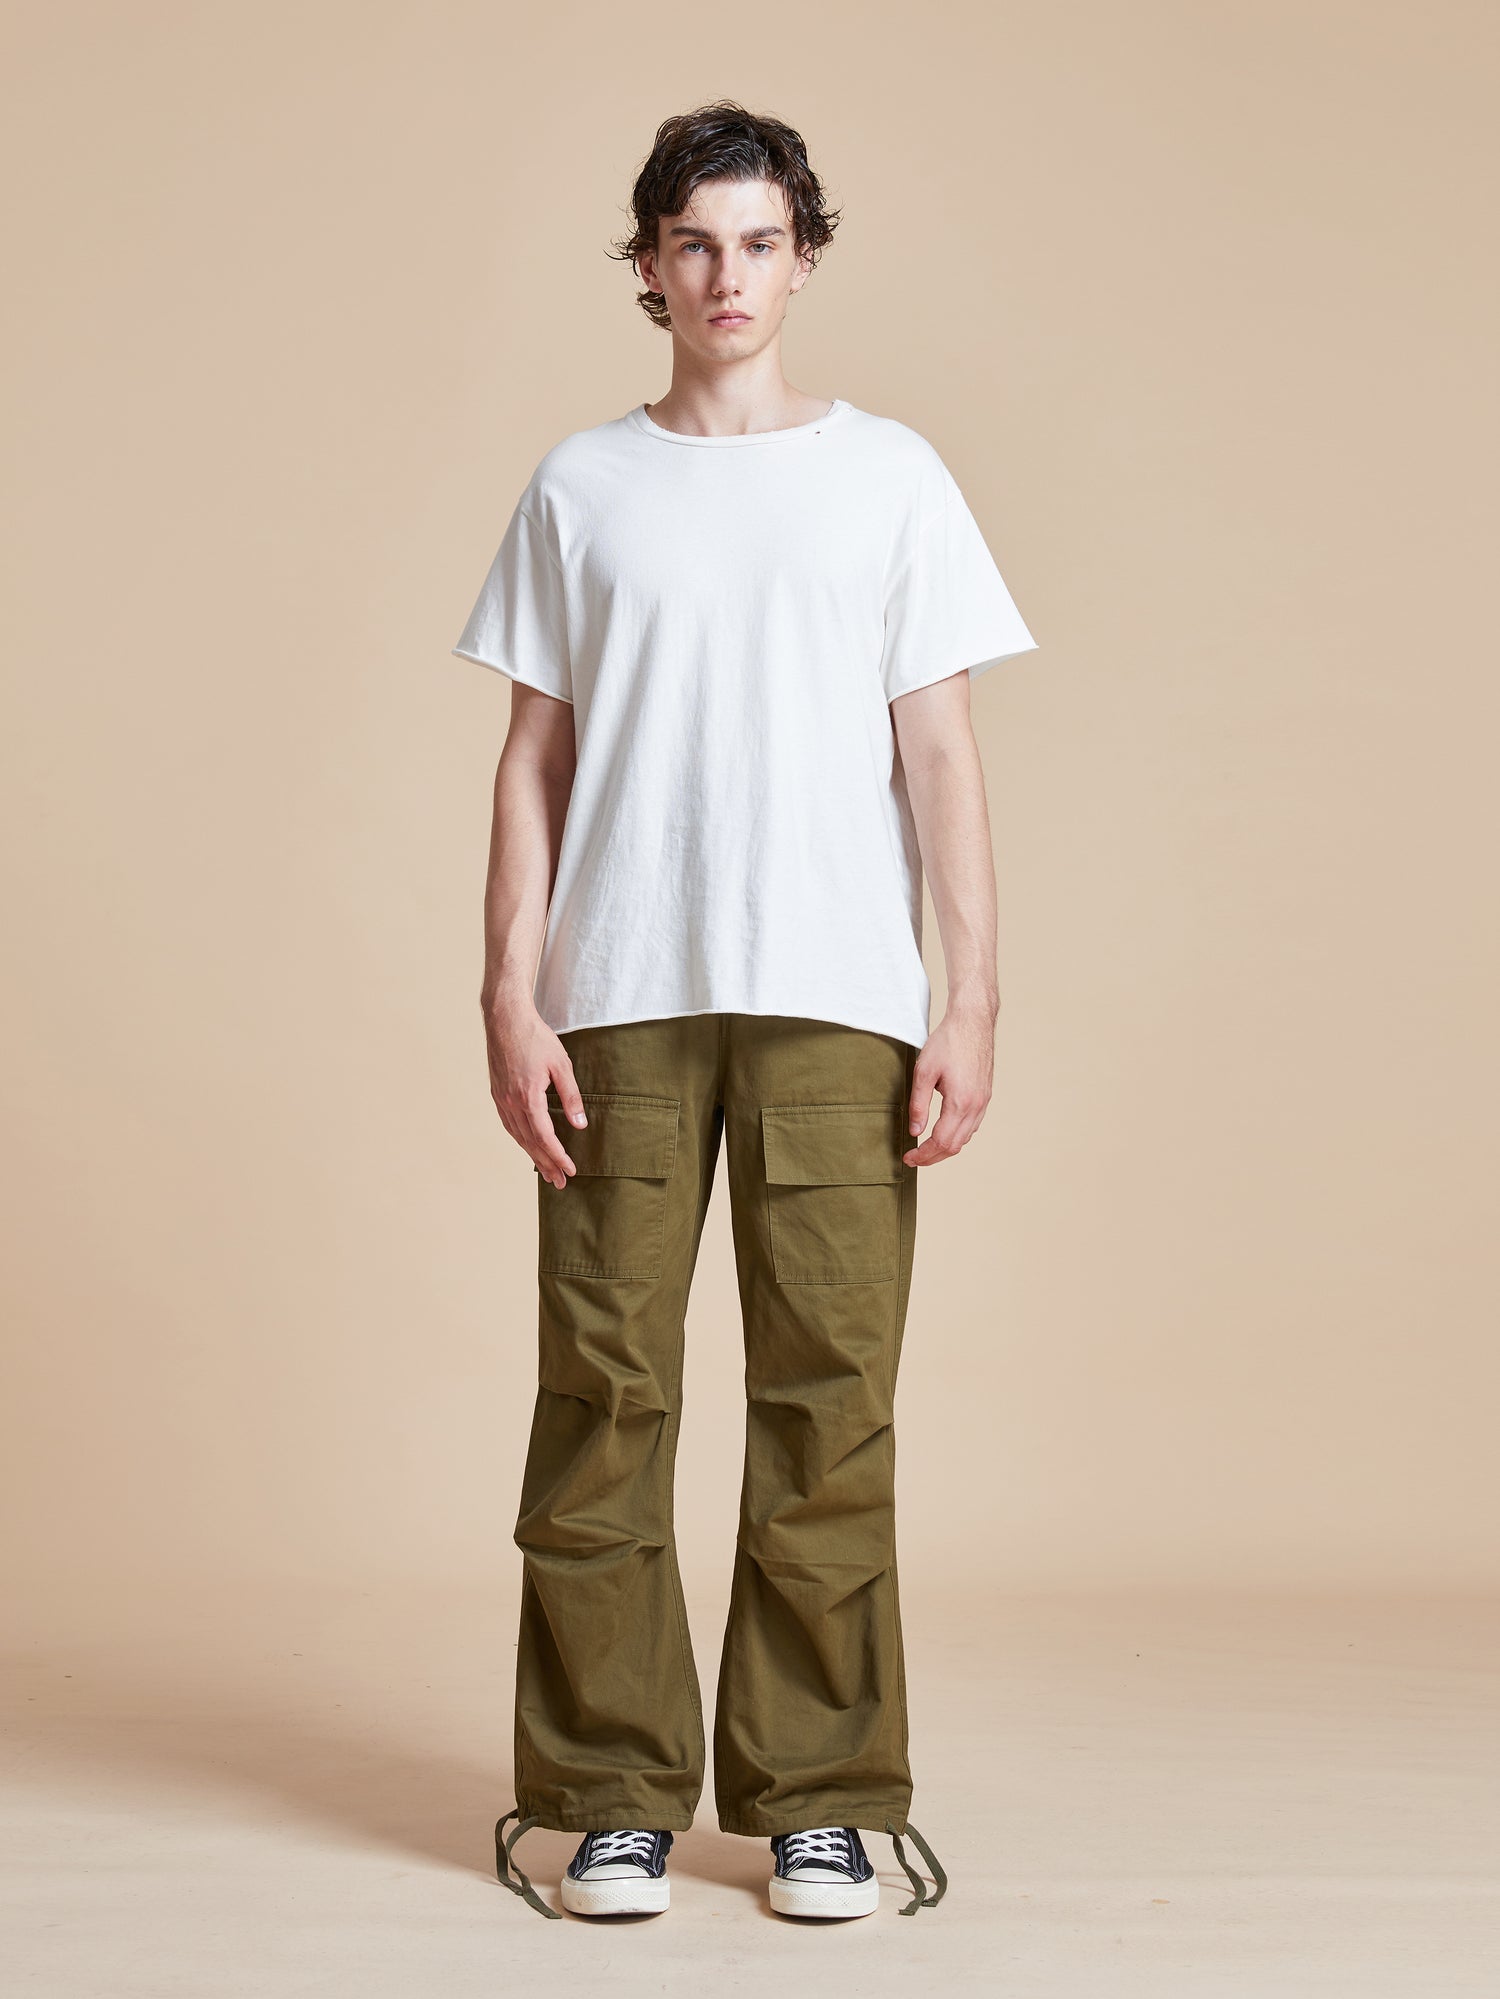 A man wearing a white t-shirt and Found Parachute Cargo Twill Pants.